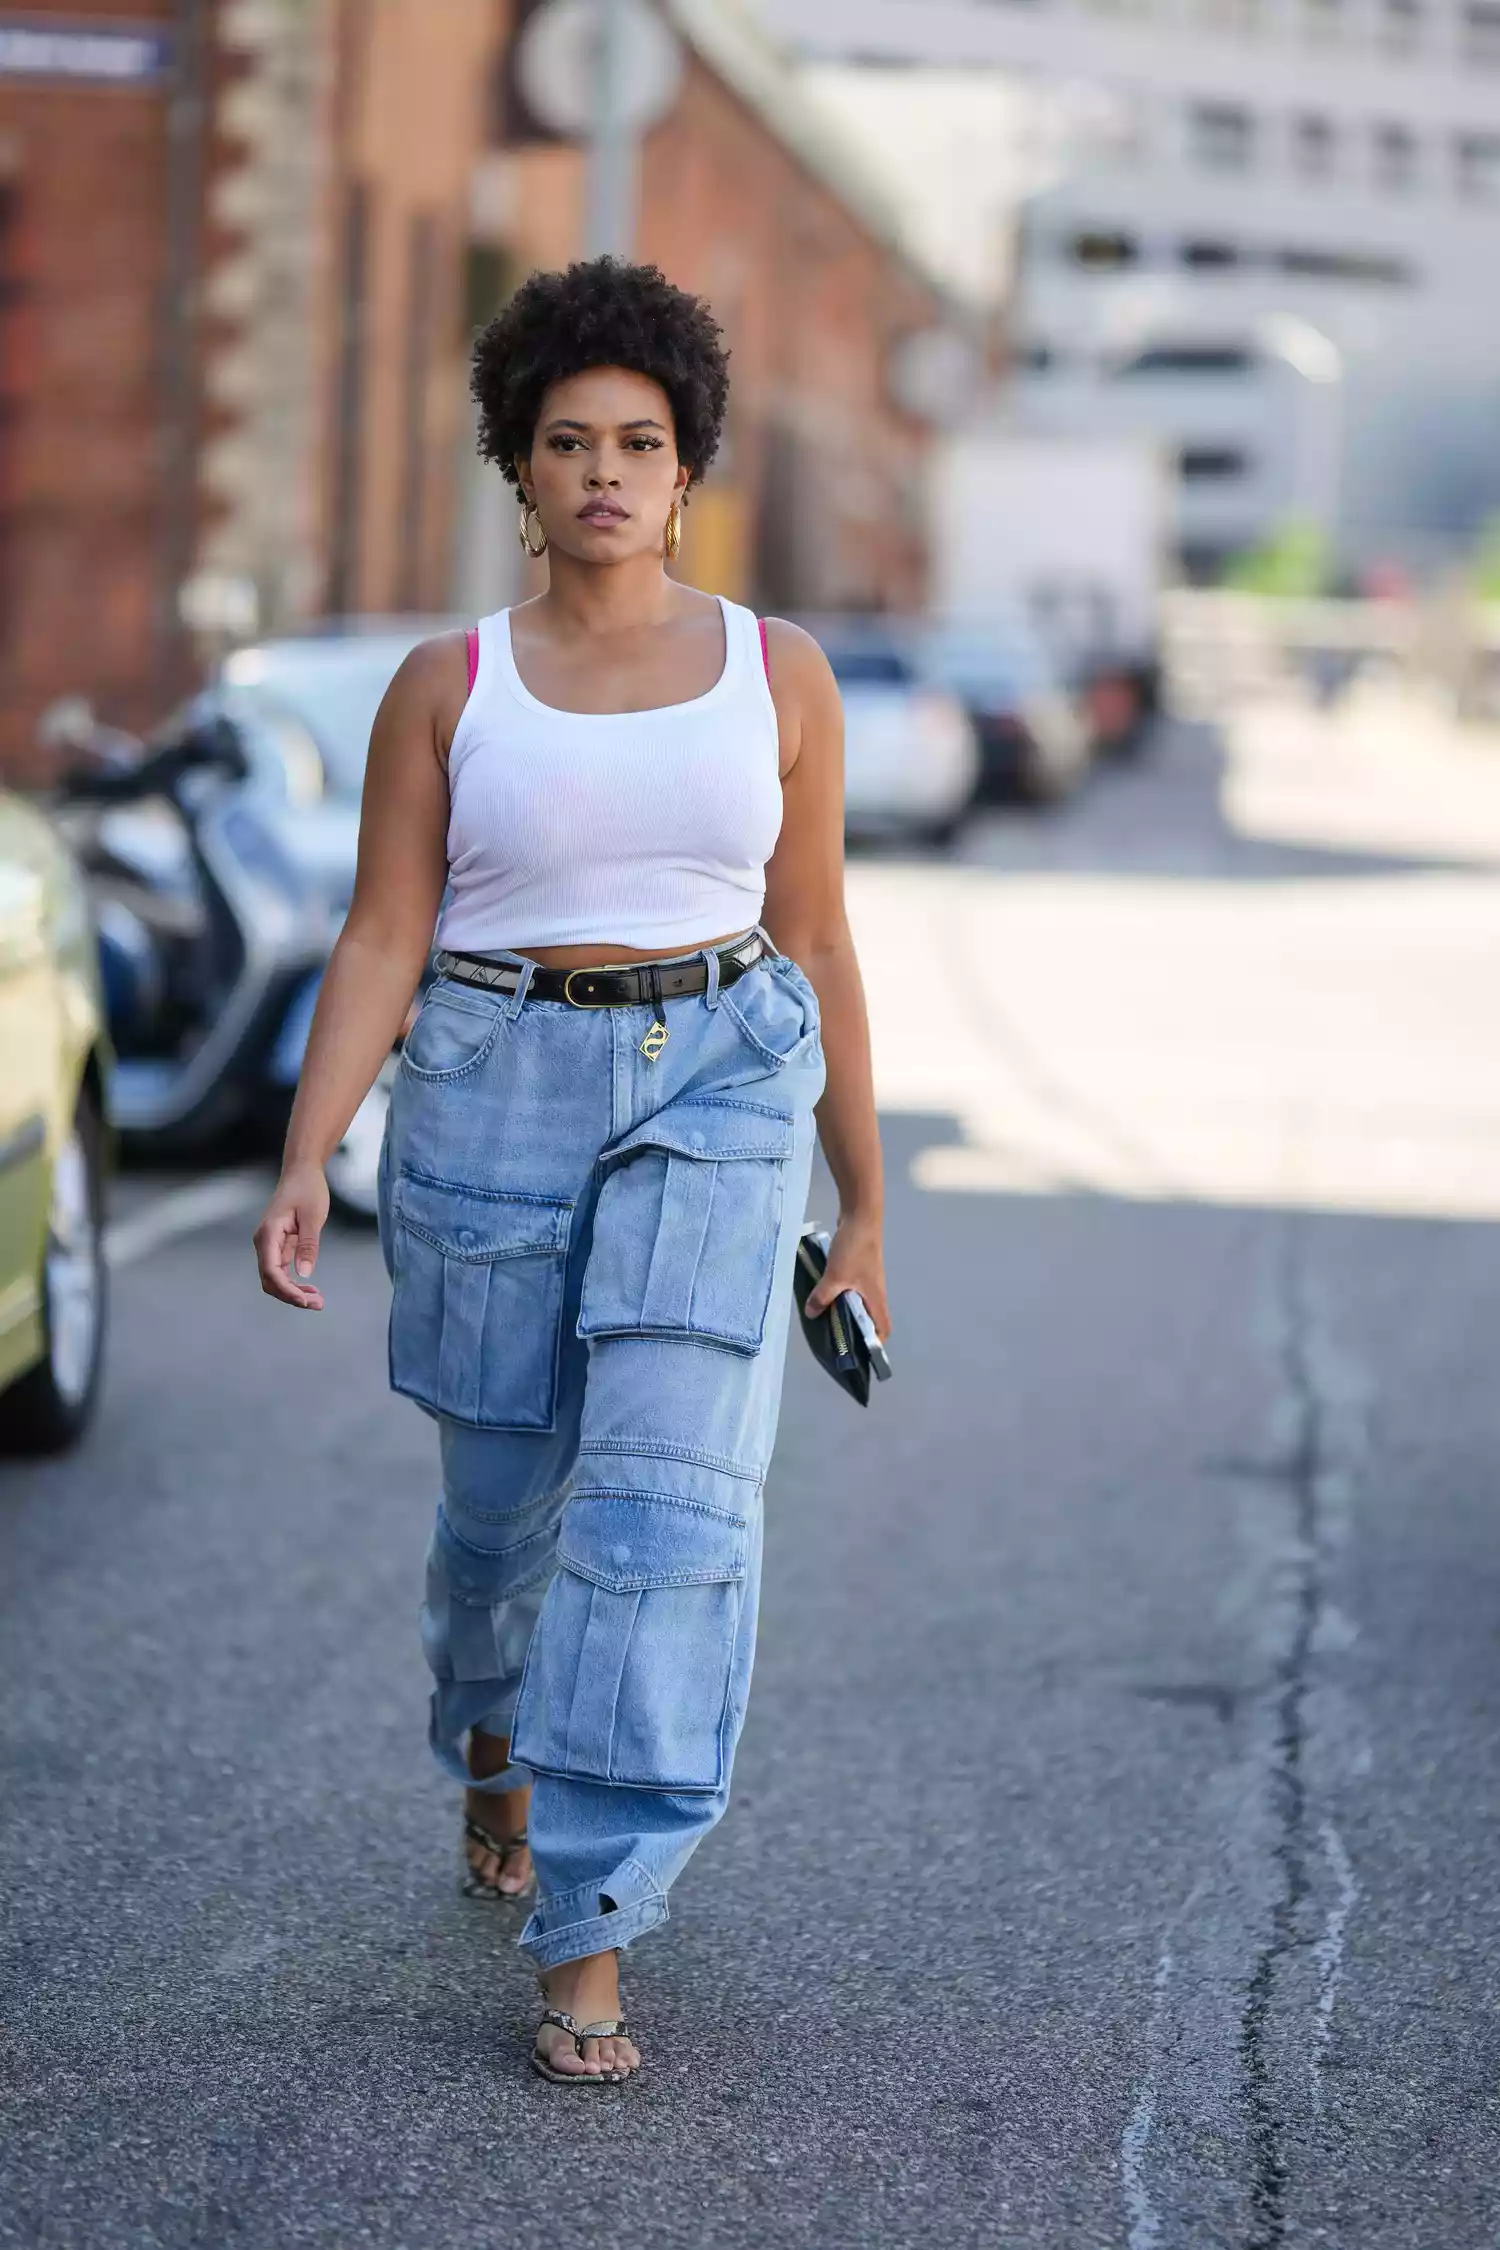 A guest wears a white tank top, a belt, blue denim cargo pants with large pockets, sandals, earrings